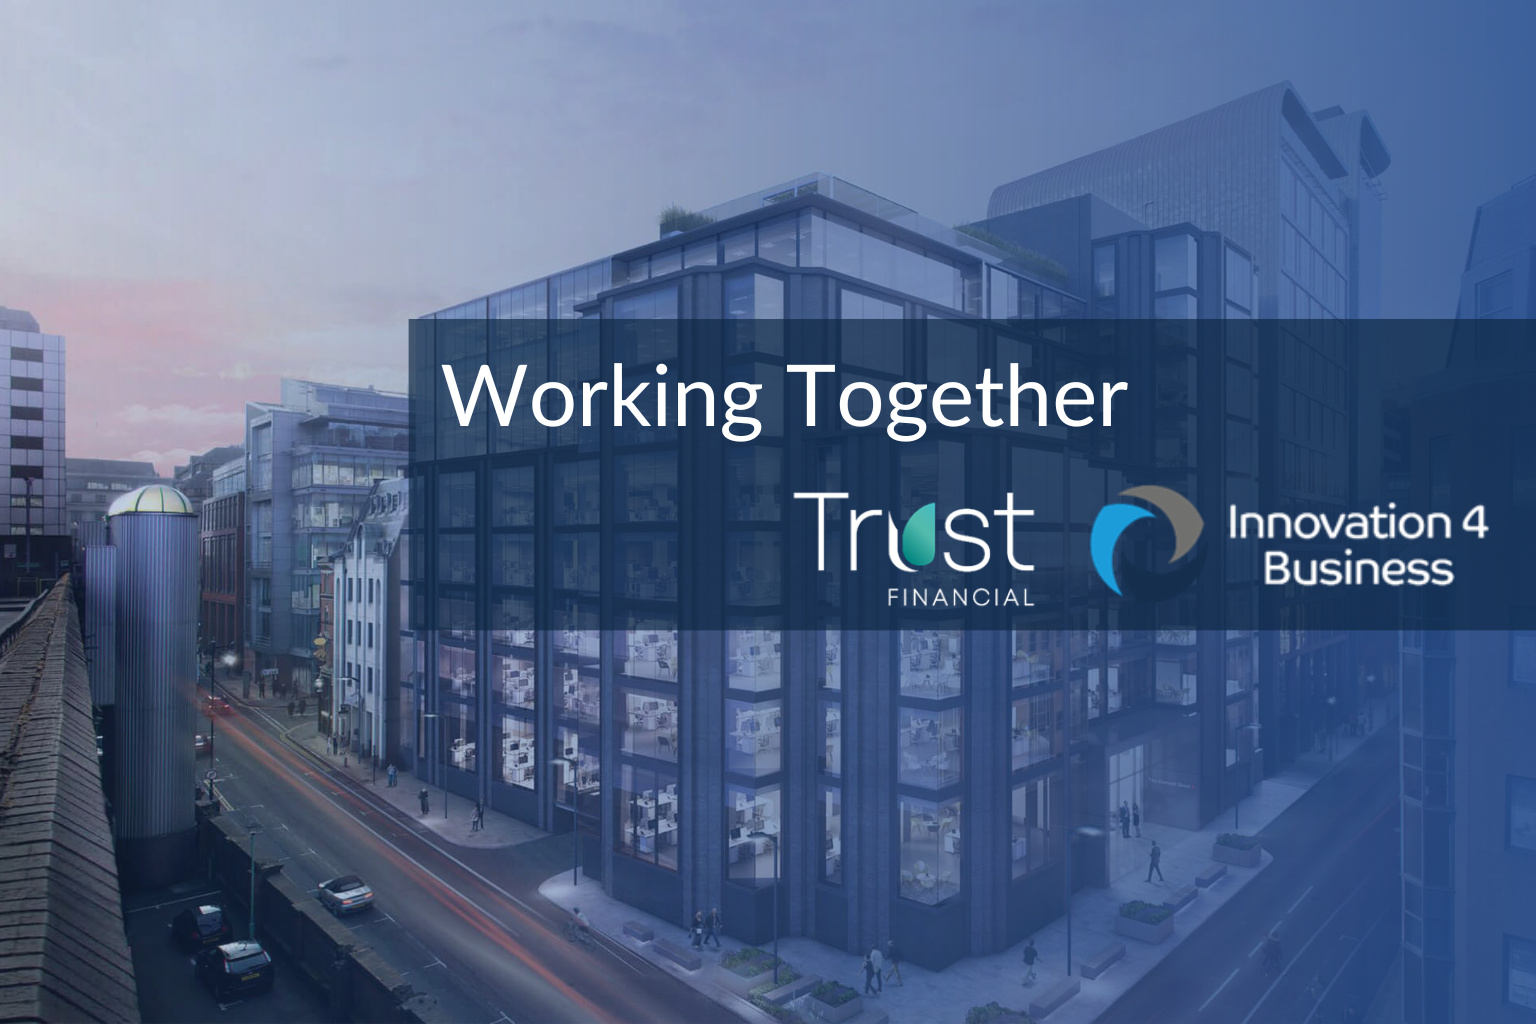 I4B & Trust Financial – Working Together